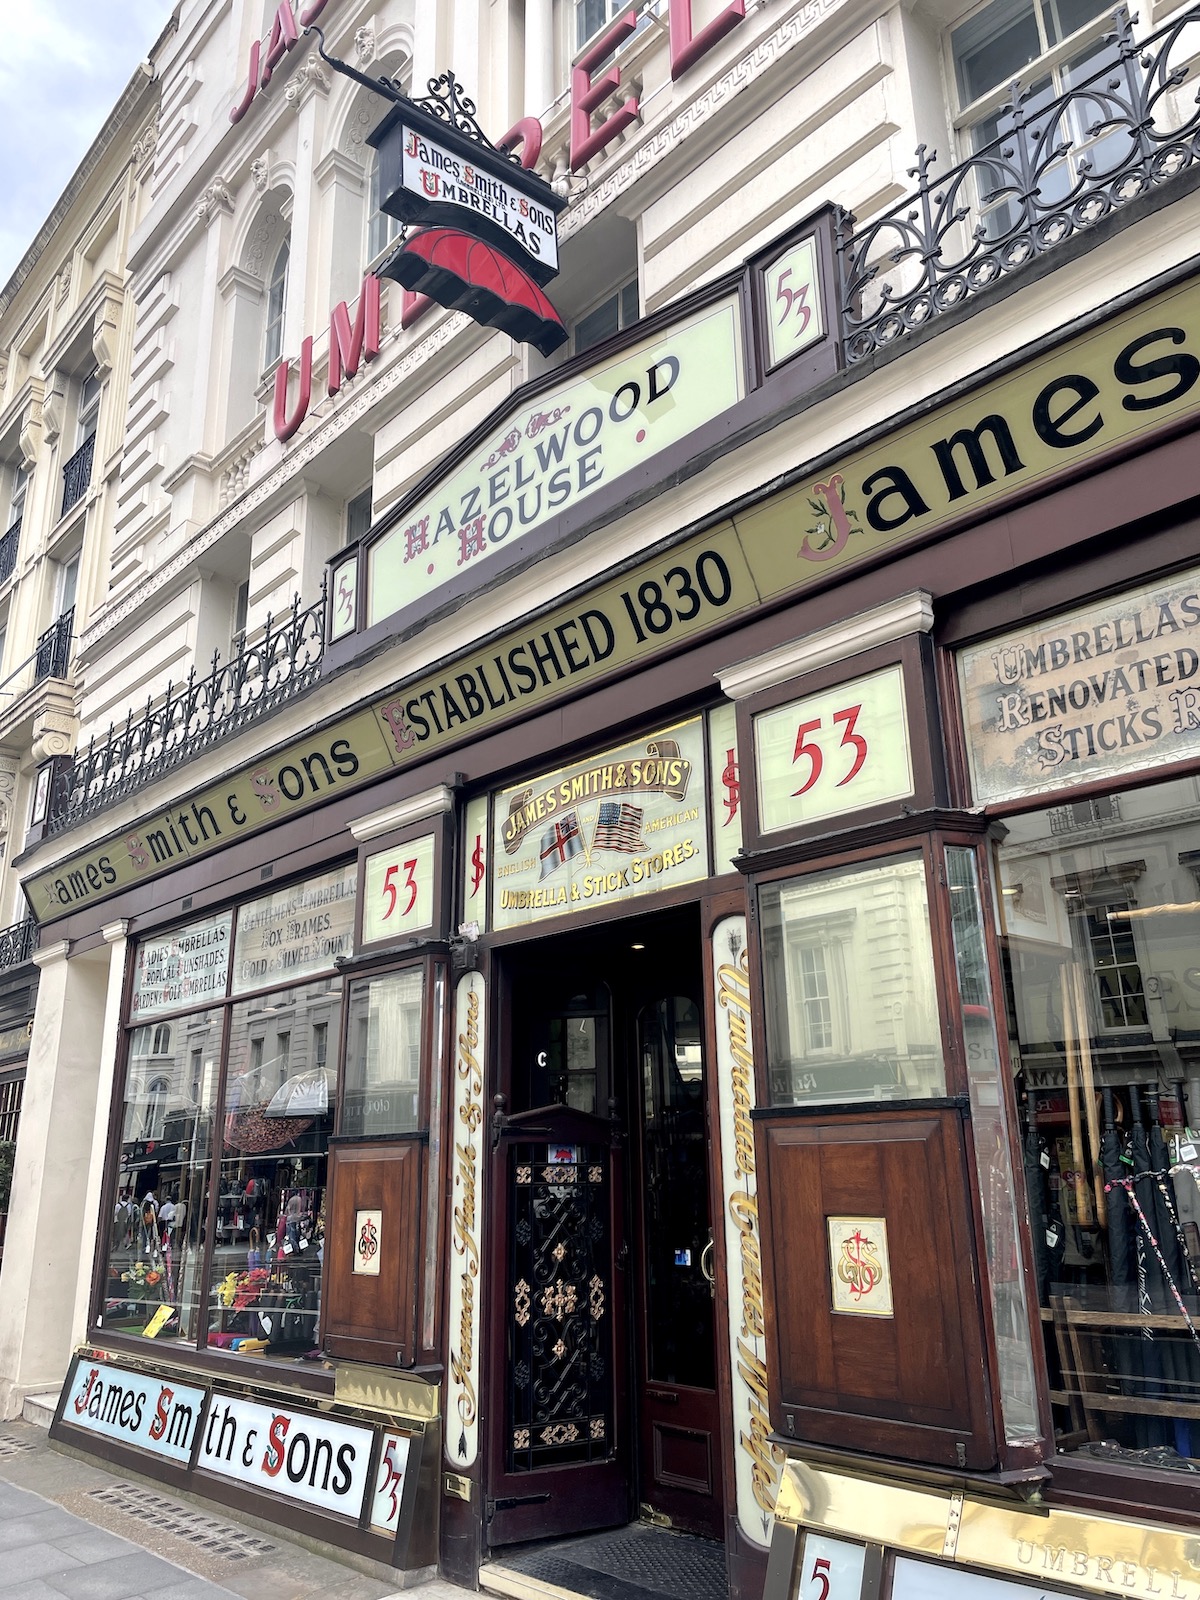 James Smith & Sons Umbrellas, a British Institution keeping customers in style and dry since 1830